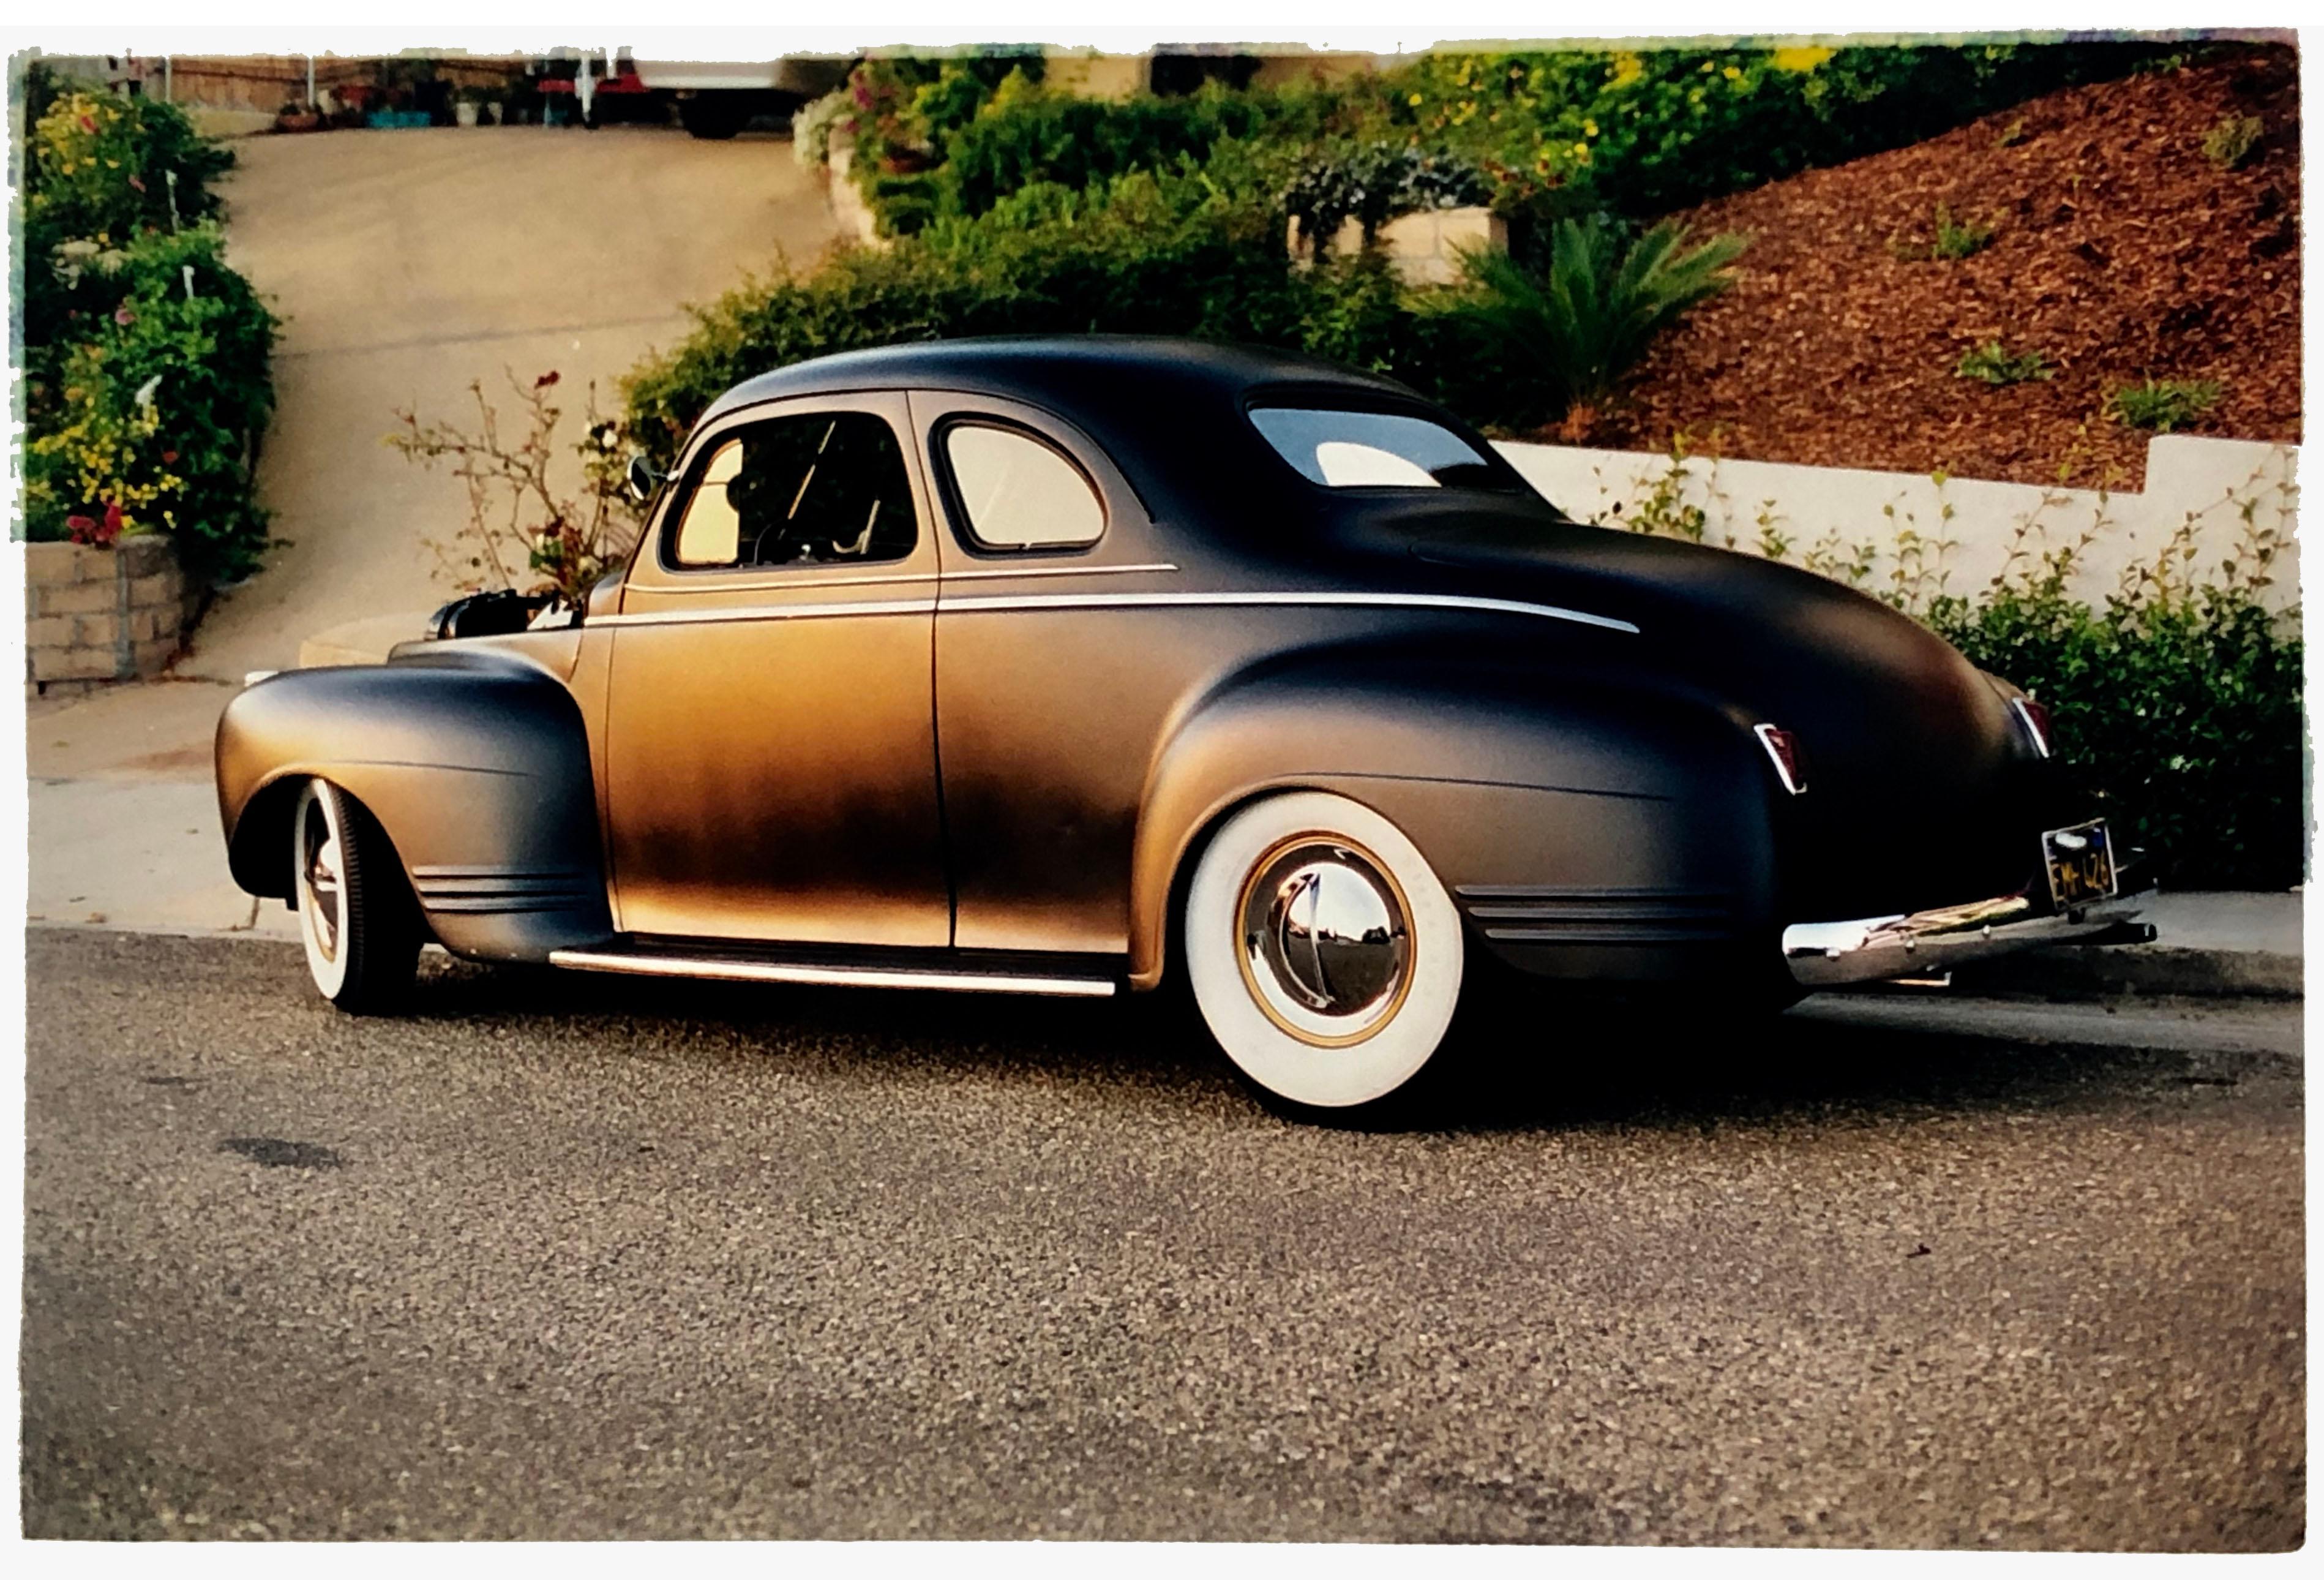 Richard Heeps Print – Shelly's '41 Plymouth, Kalifornien - Dream in Color Serie - Vintage-Auto-Foto